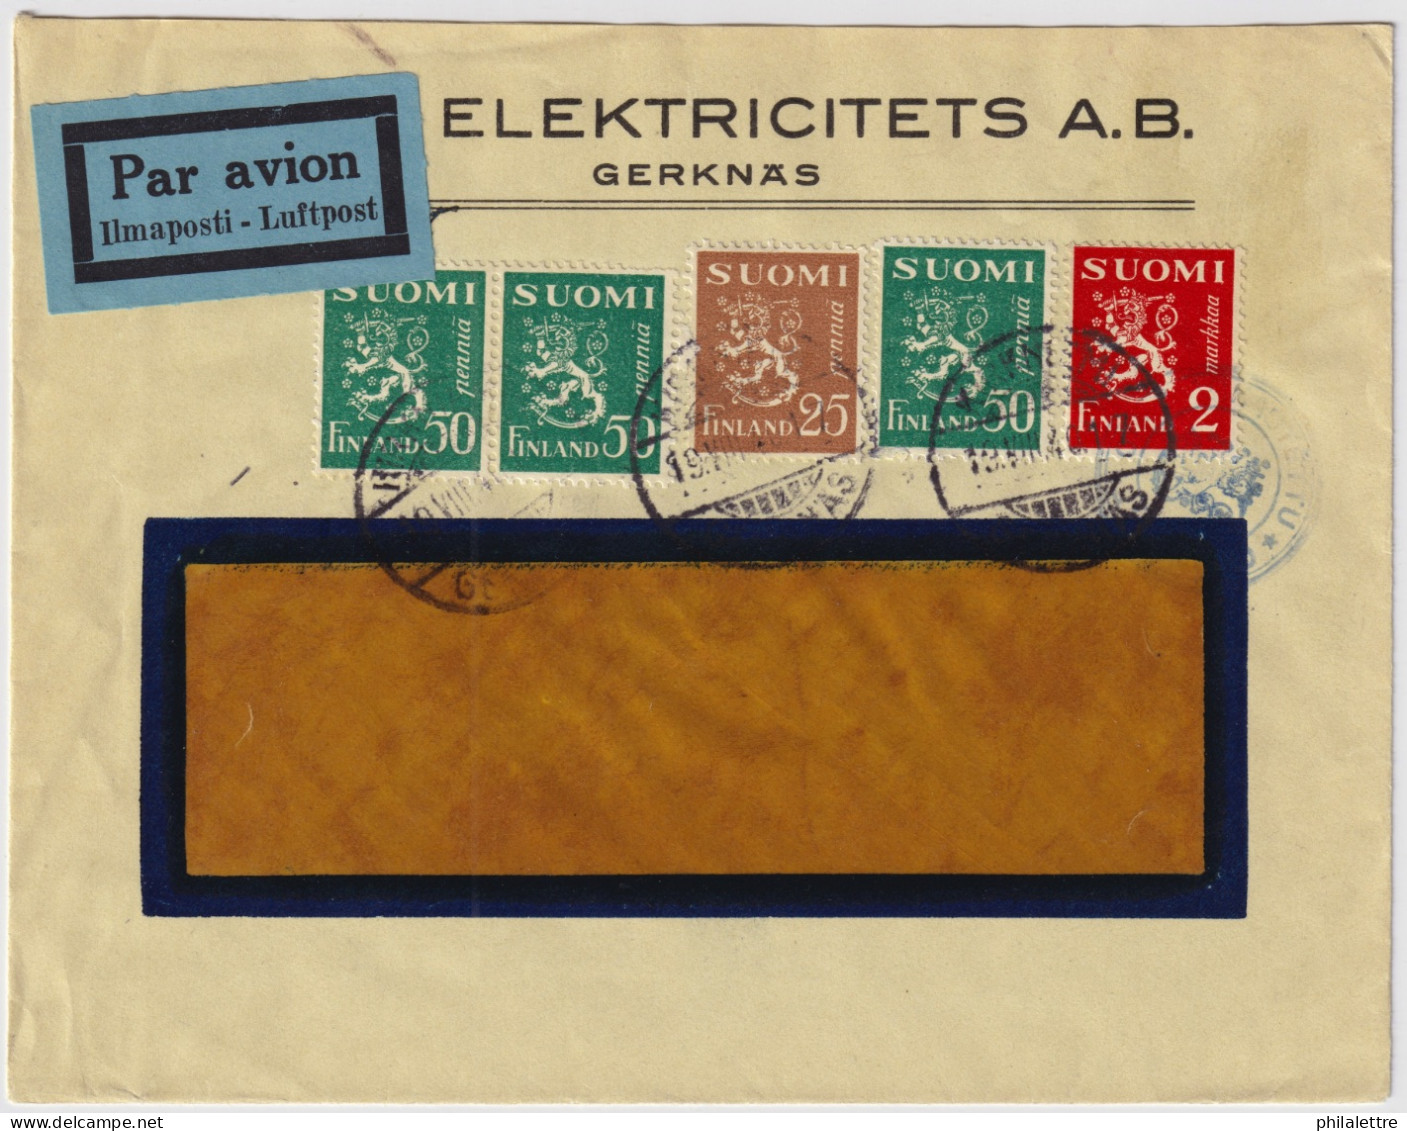 FINLAND - 1940 - Facit F150, 3xF180 & F201 On Censored Air Mail Cover From KIRKIEMI / GERKNÄS - Covers & Documents